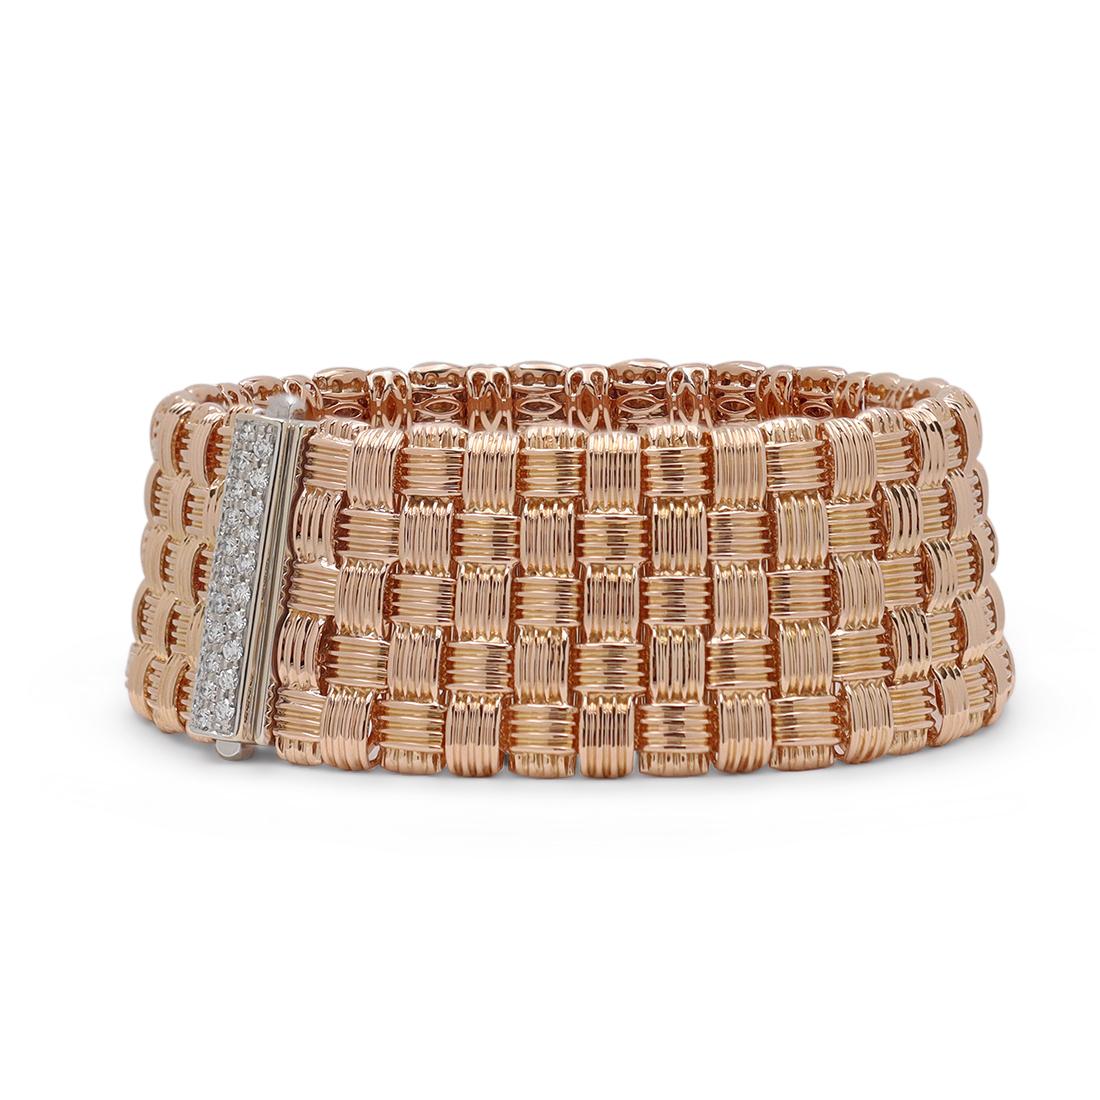 Authentic Roberto Coin 18 karat rose gold flexible five-row woven look bracelet with a diamond-encrusted clasp from the Appassionata collection. The round brilliant cut diamonds (G-H in color, VS-SI clarity) estimated at 0.40 carats total are set in